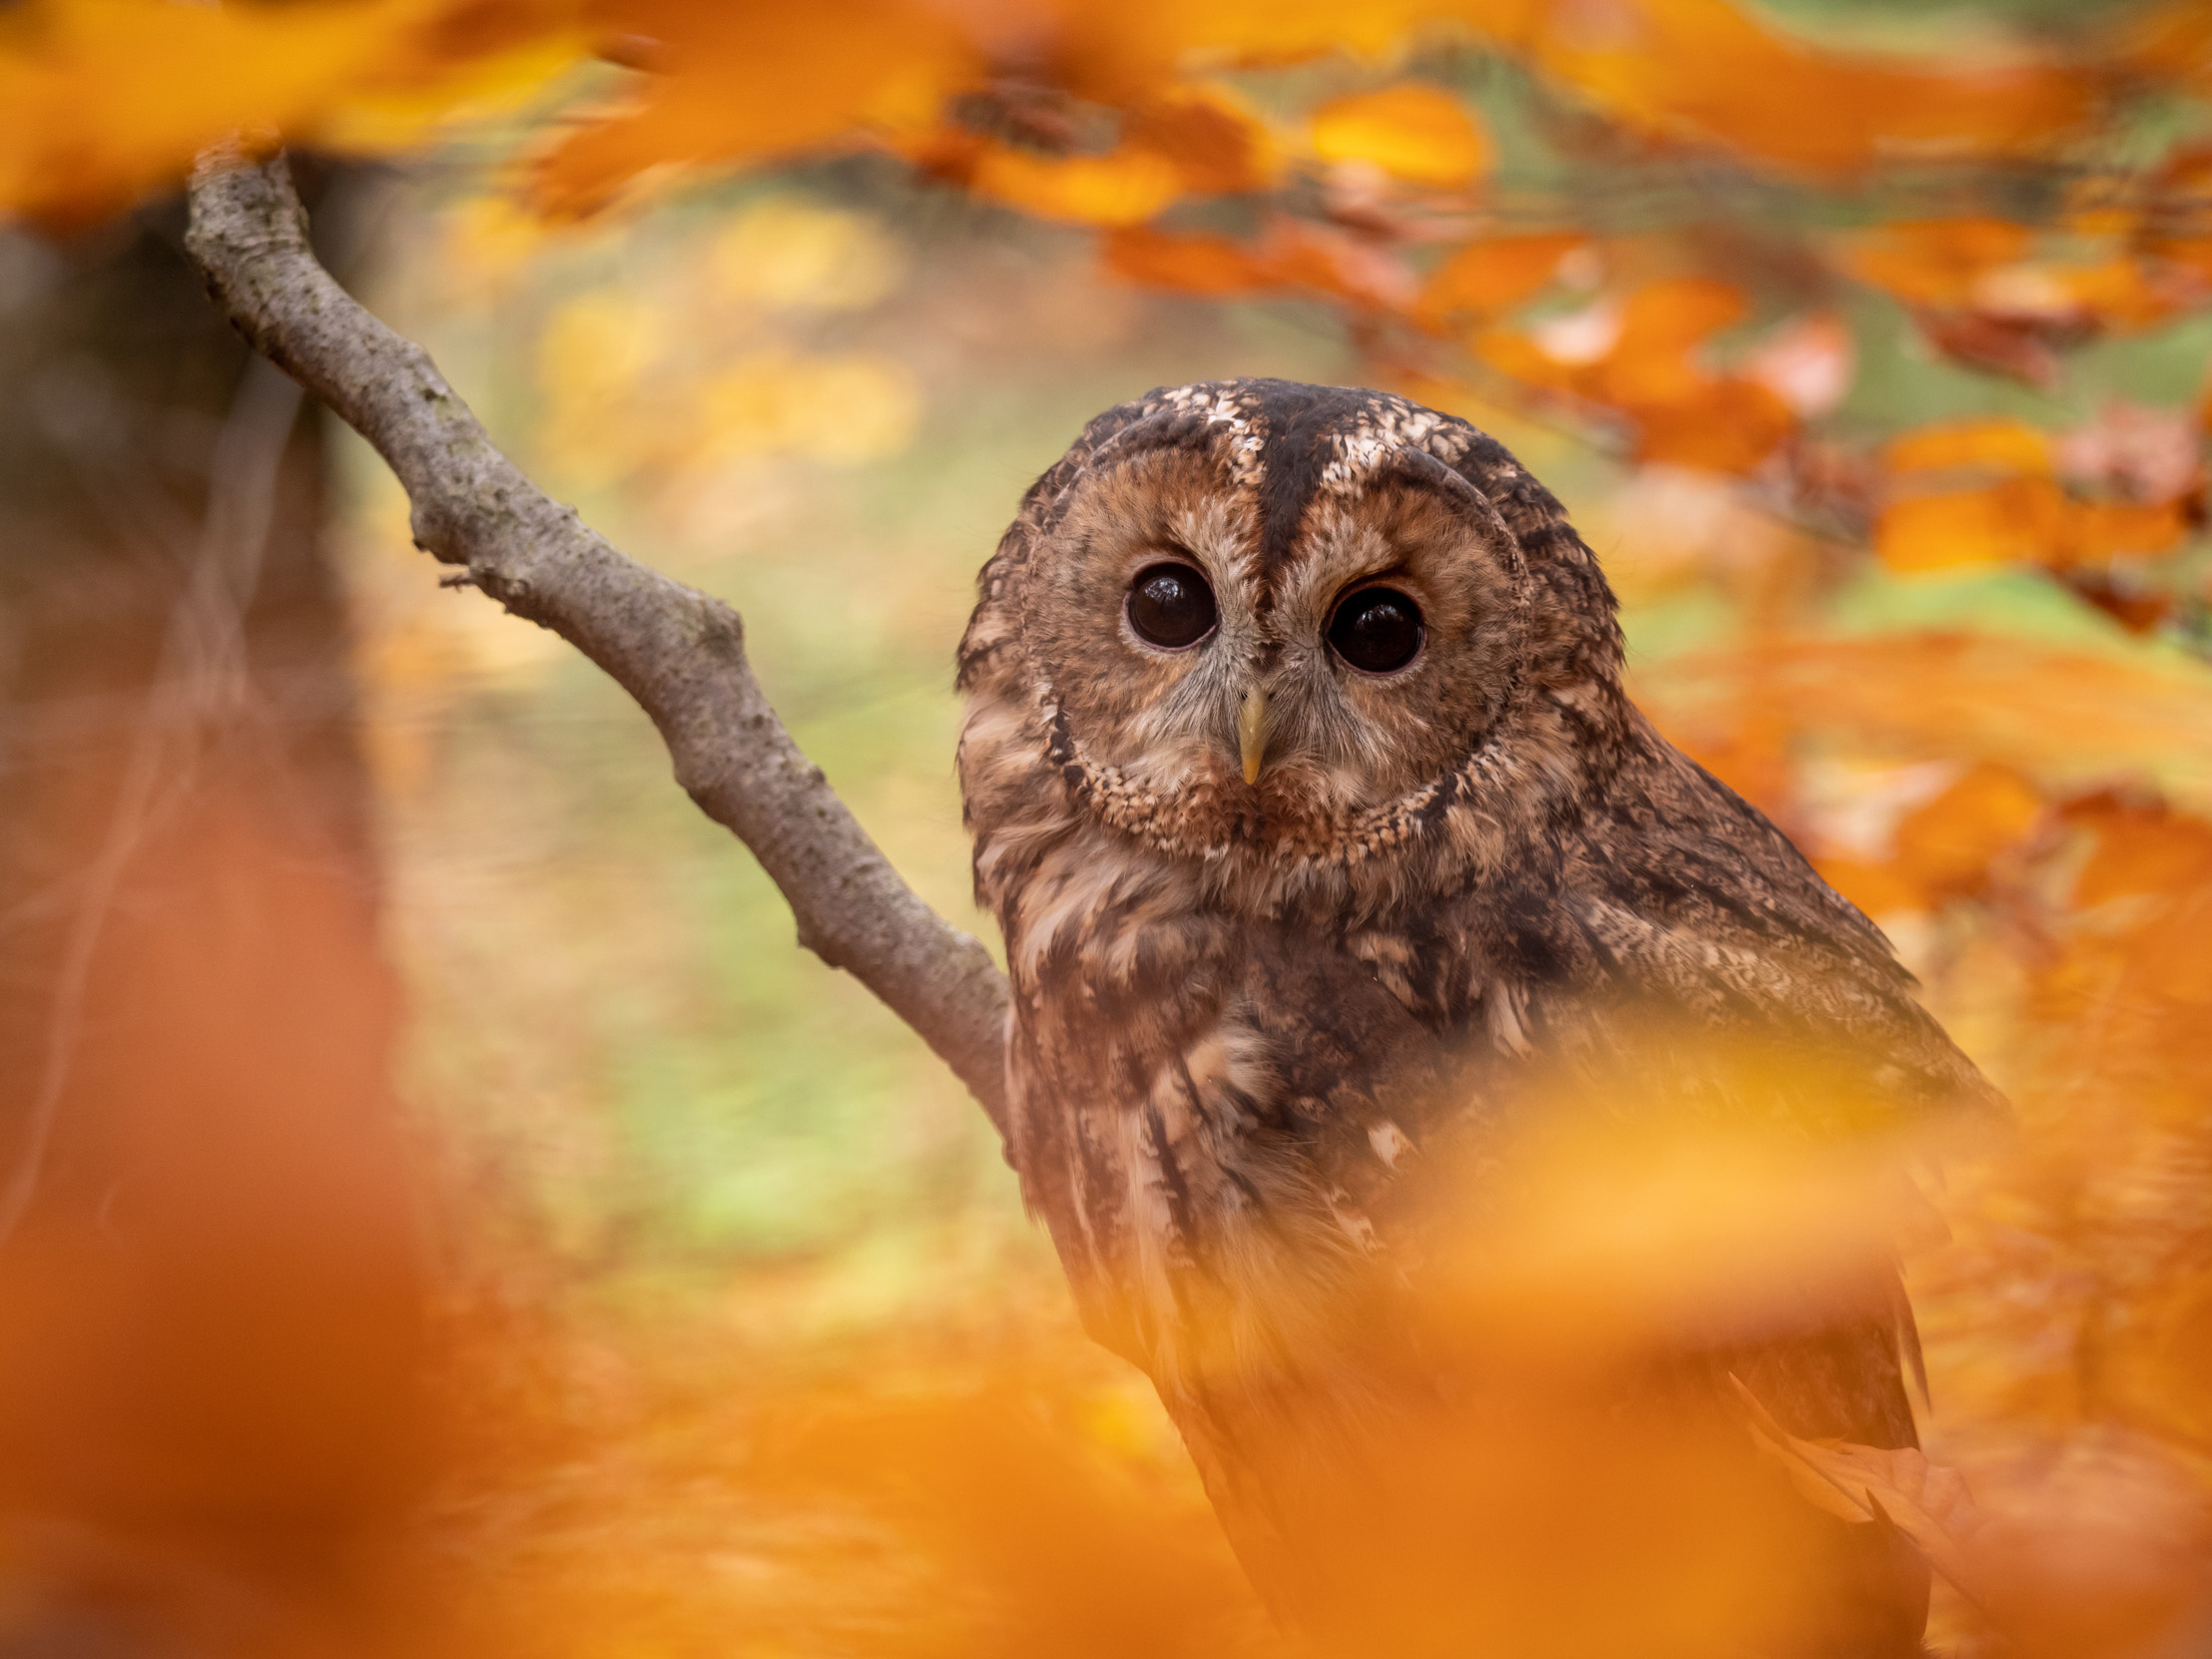 A lone Tawny Owl sitting on a tree branch in an autumn forest.